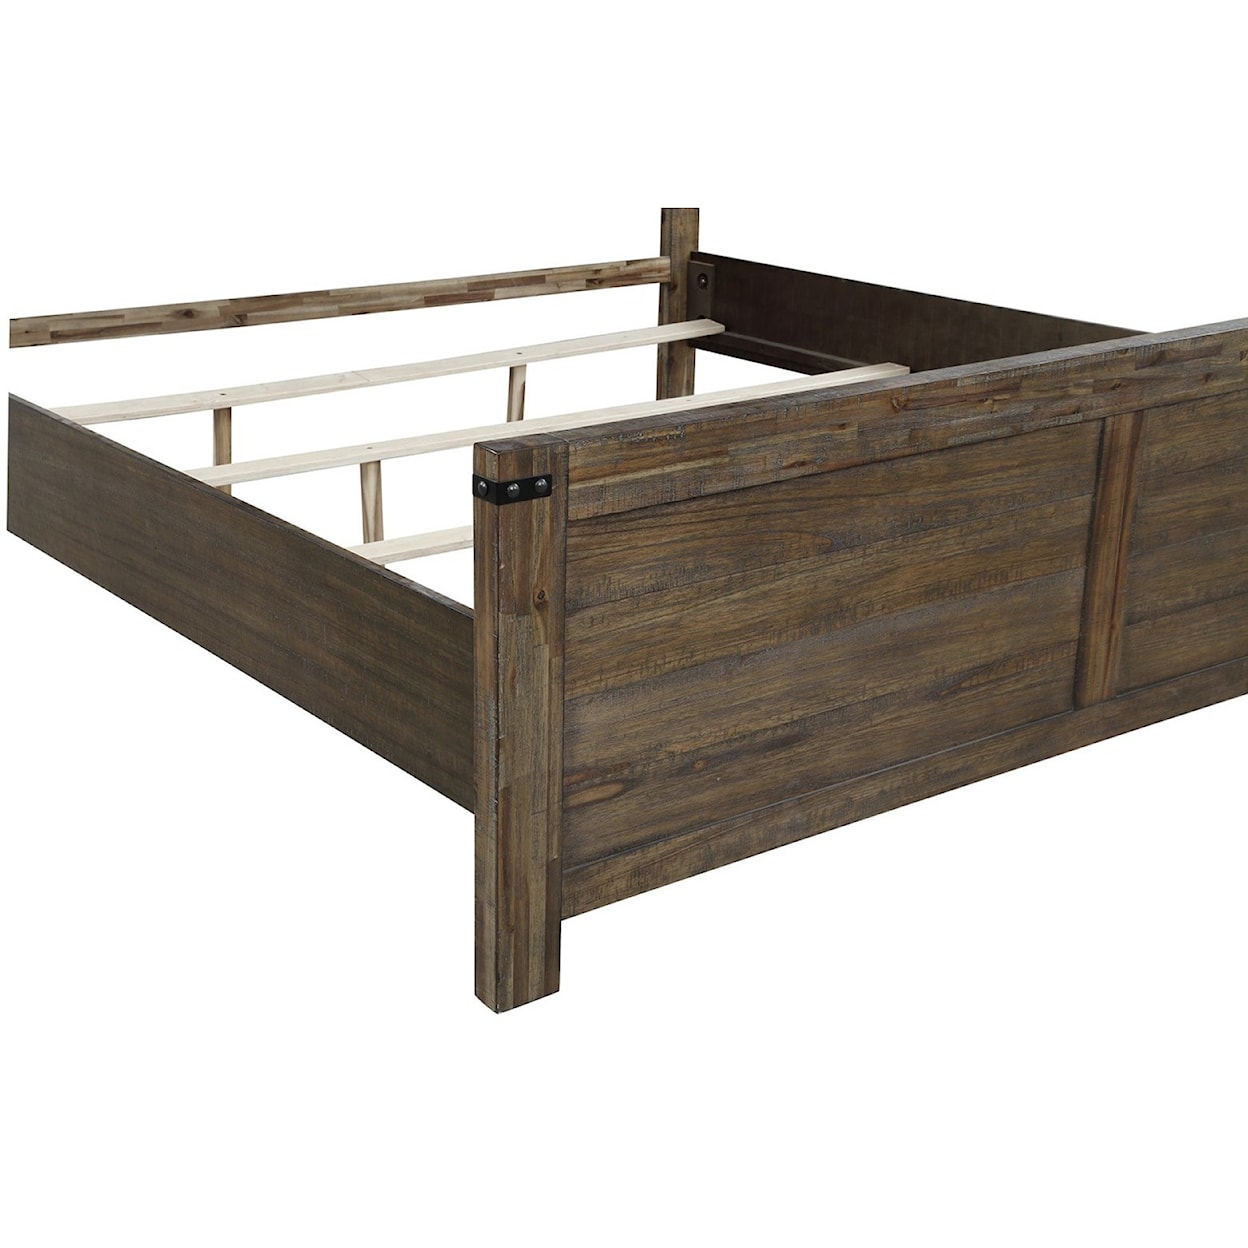 New Classic Furniture Galleon Queen Panel Bed